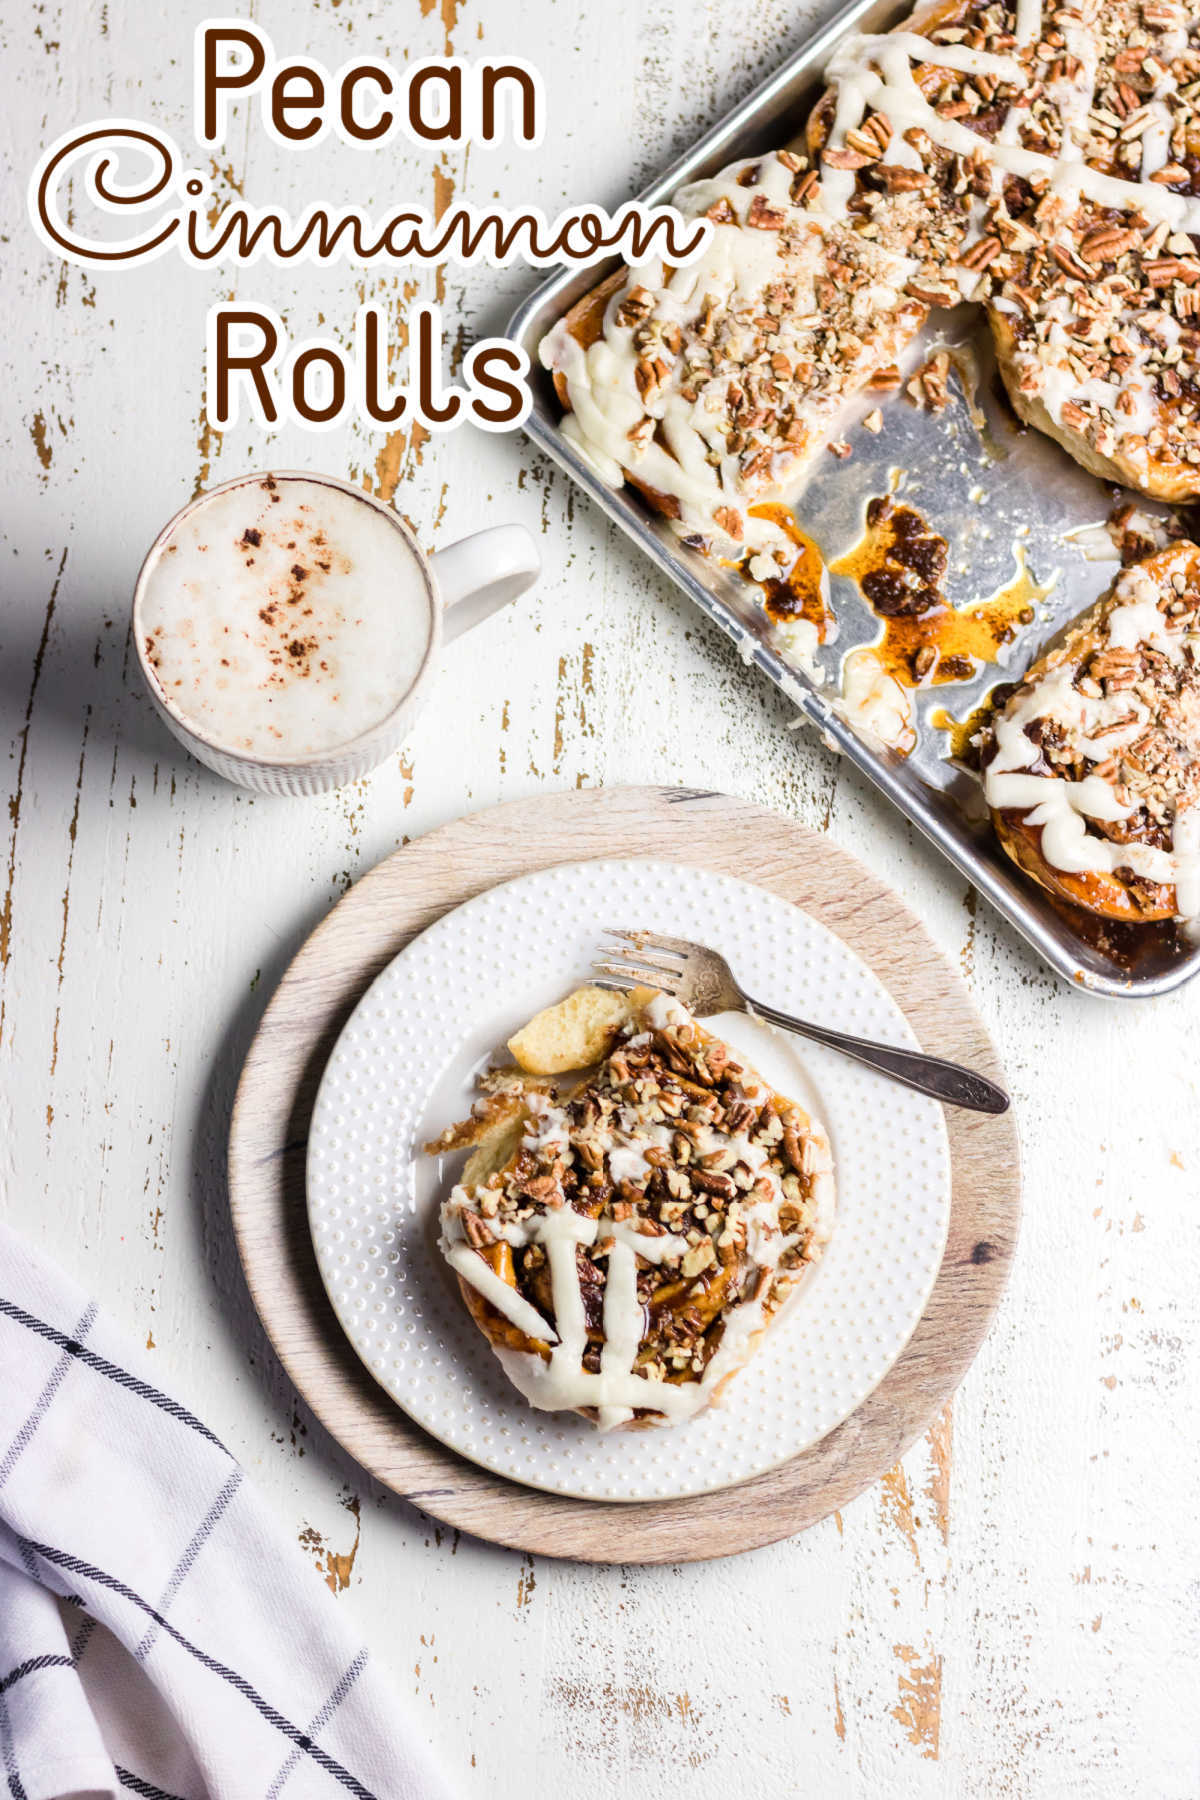 Pecan roll on a plate with a pan of rolls next to it. Title text overlay.